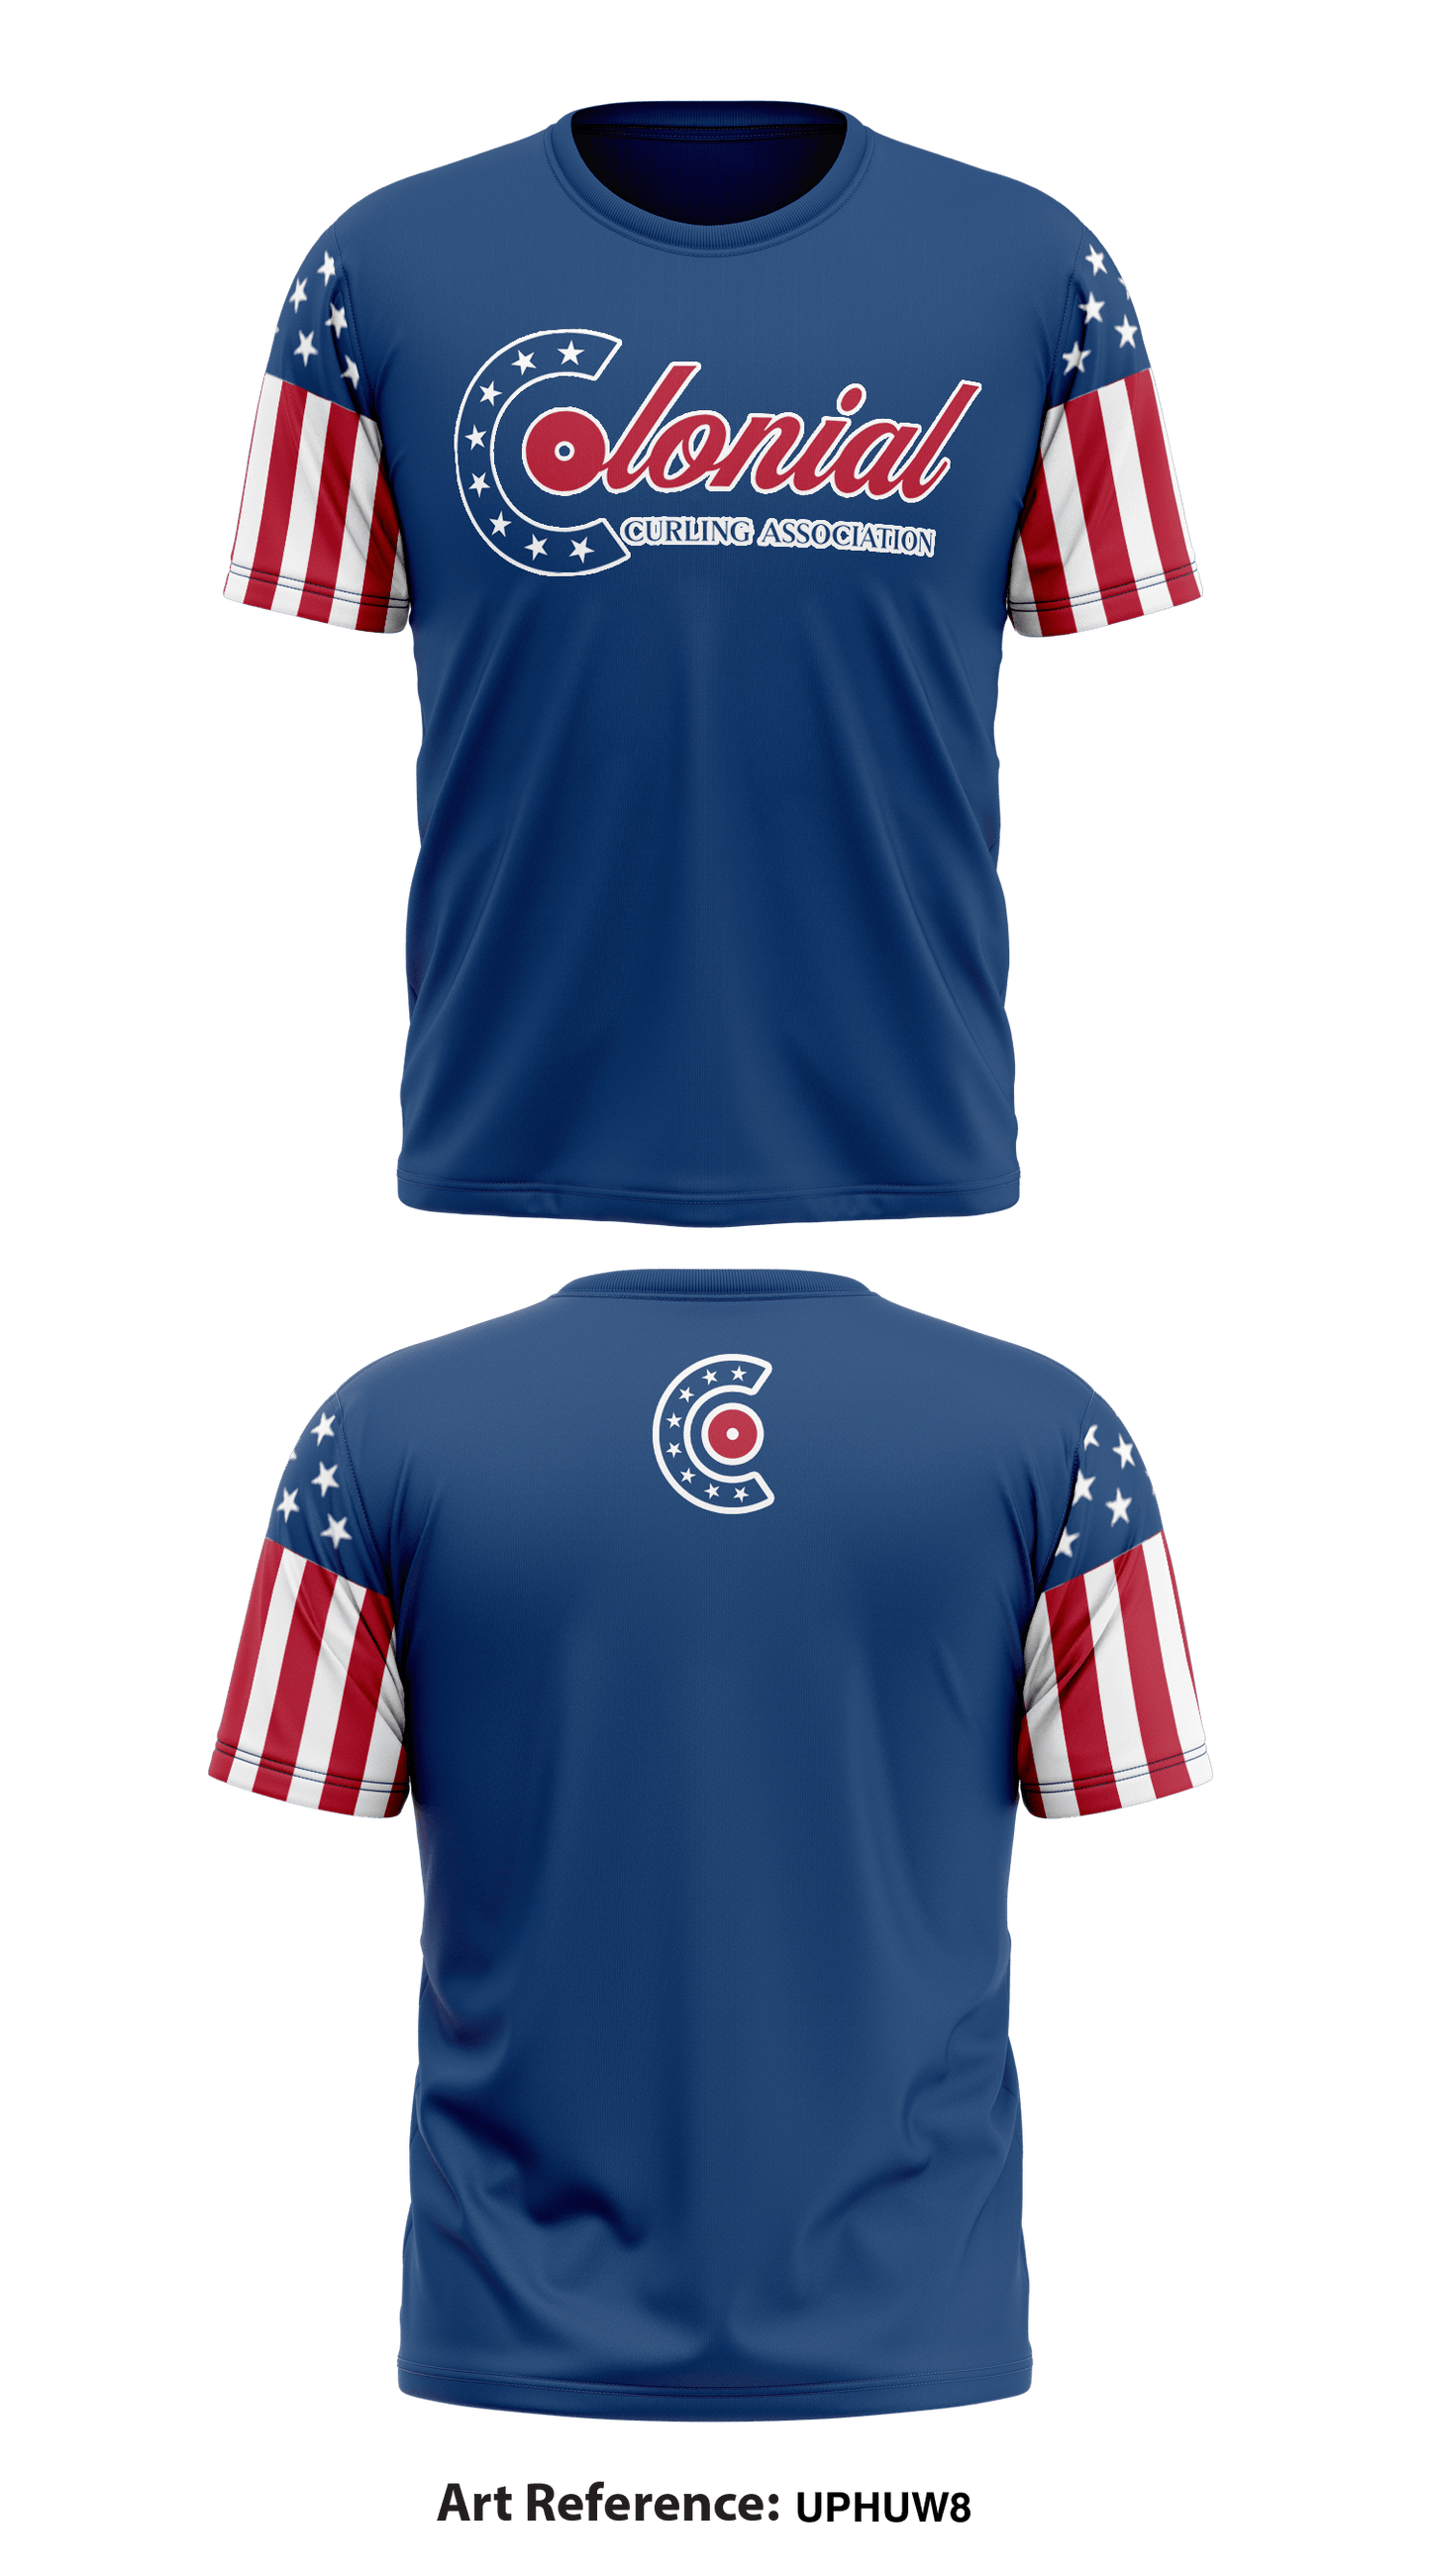 Colonial Curling Association Store 1 Core Men's SS Performance Tee - uPHUw8